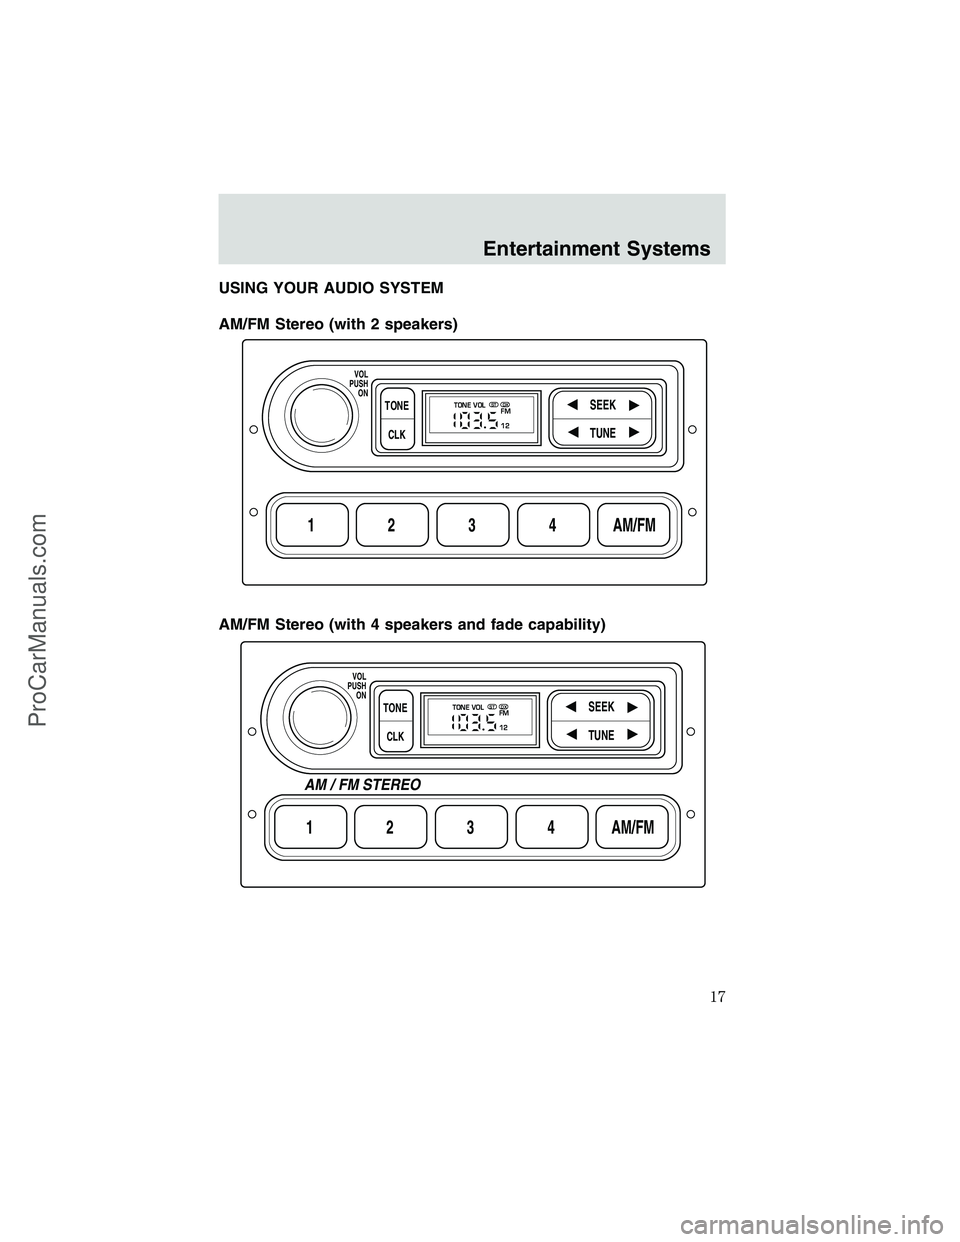 FORD E-250 2002  Owners Manual USING YOUR AUDIO SYSTEM
AM/FM Stereo (with 2 speakers)
AM/FM Stereo (with 4 speakers and fade capability)
1234AM/FM
SEEKTONE
CLK
TUNE
TONE VOL
12 FMSTDX
VOL
PUSH
ON
1234AM/FM
SEEKTONE
CLK
TUNE
TONE VO